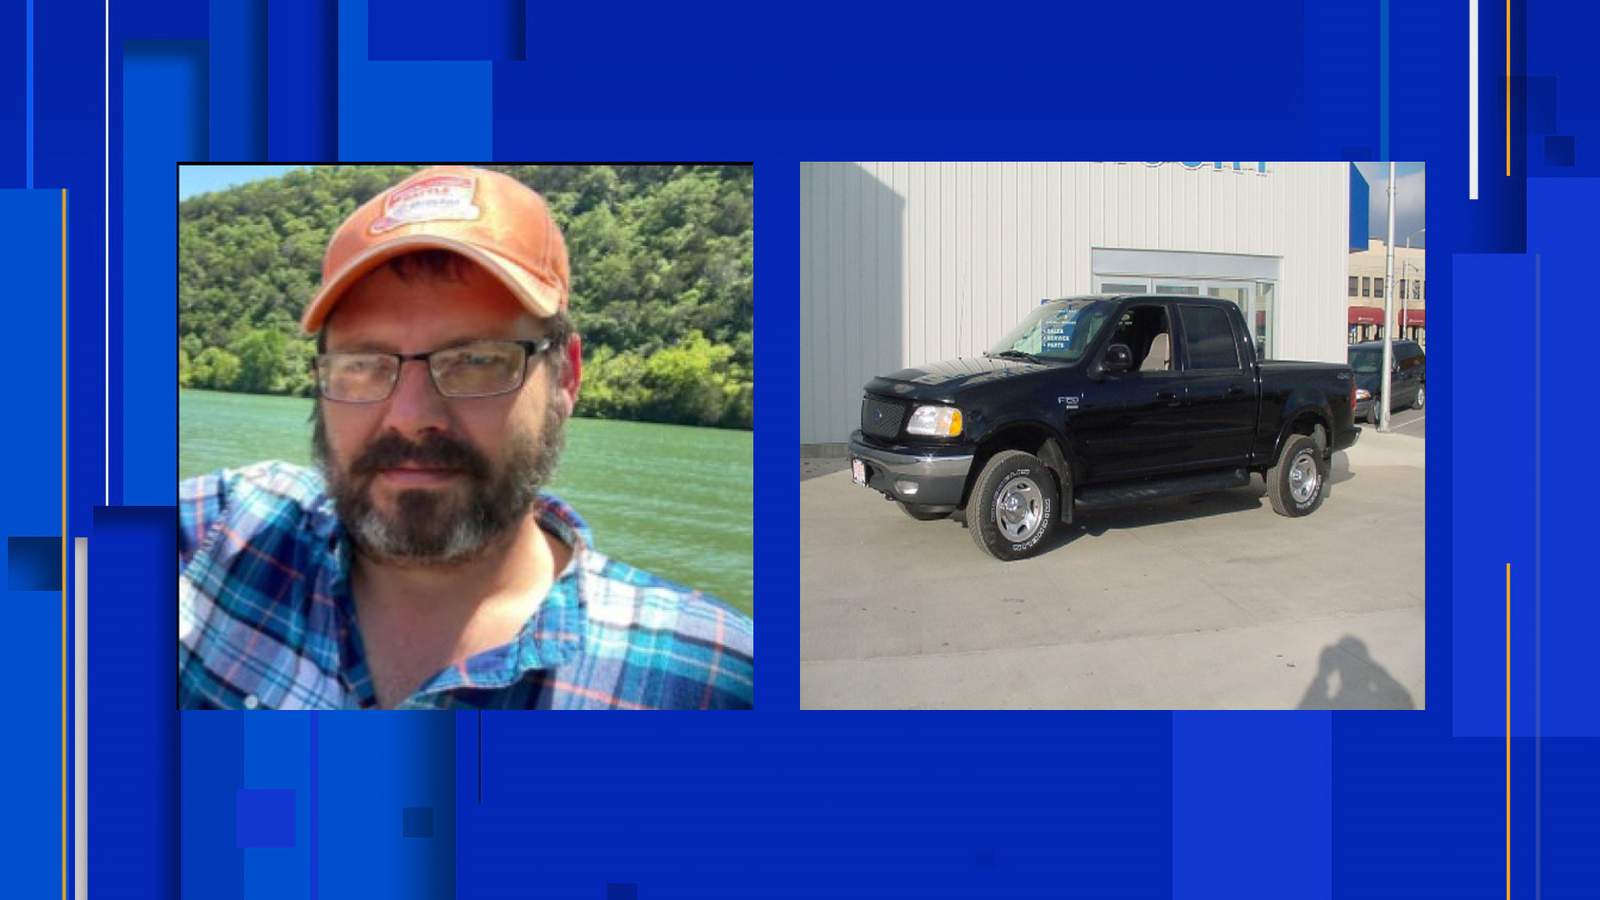 CLEAR Alert discontinued for missing 48-year-old man